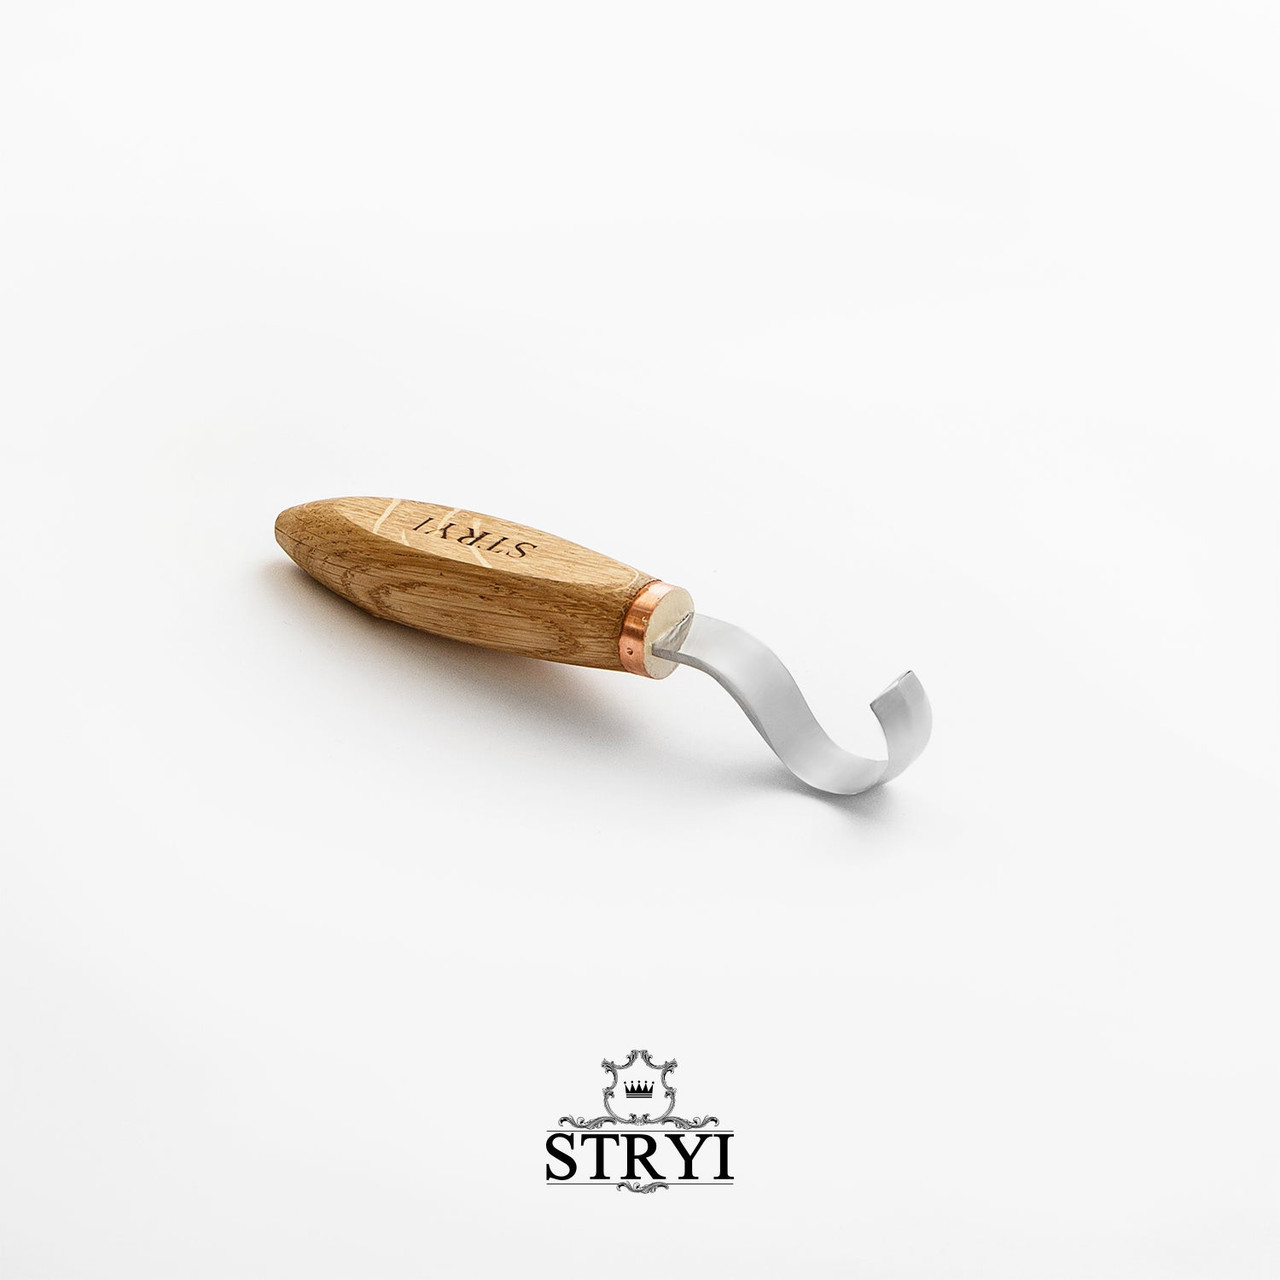 Stryi Spoon Carving Knife 30mm Left with a curved blade edge and the logo on the oak handle